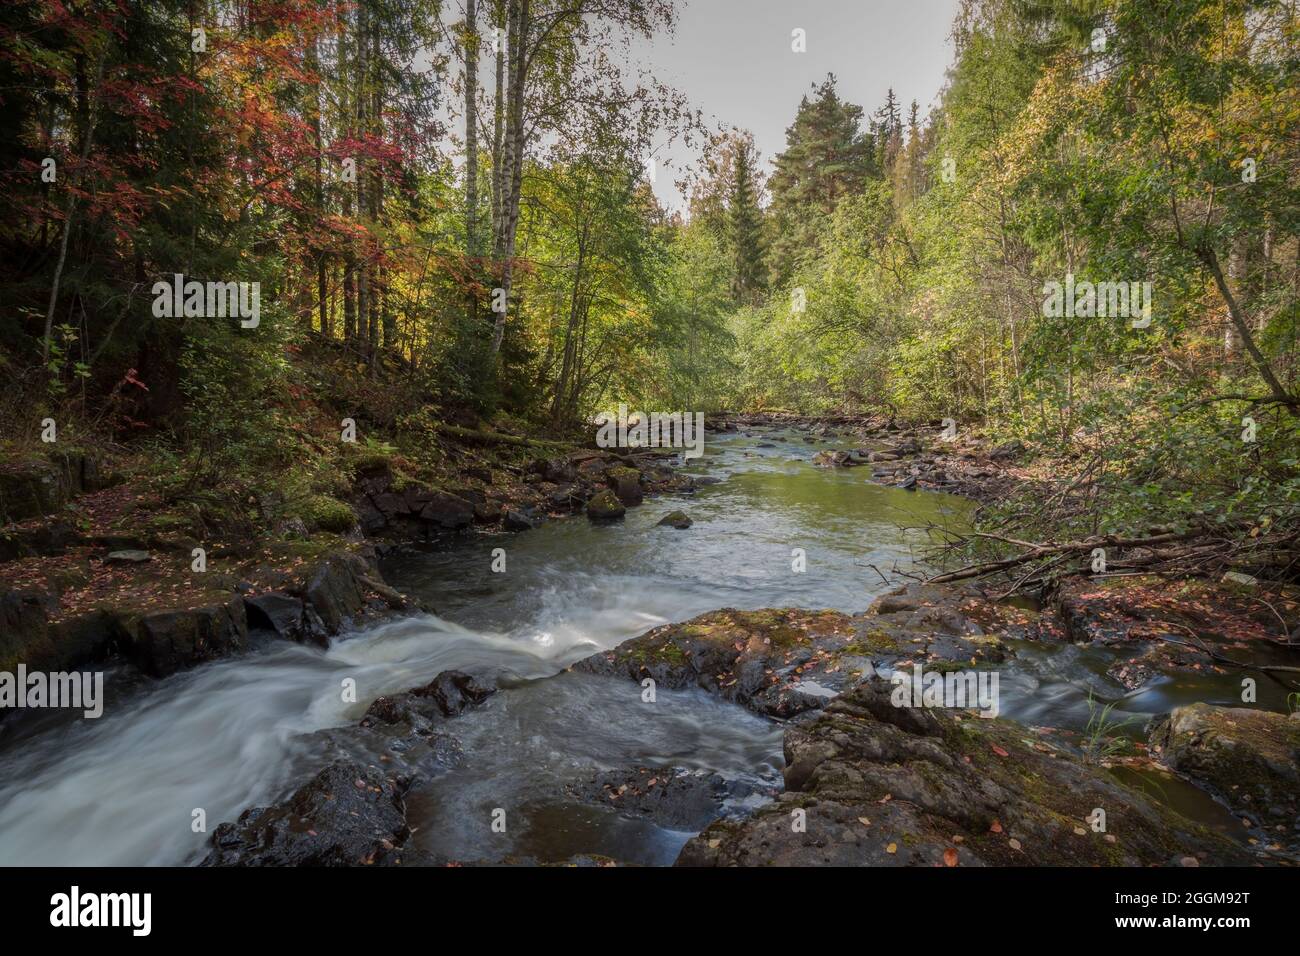 waterfall in a river forest landscape Stock Photo